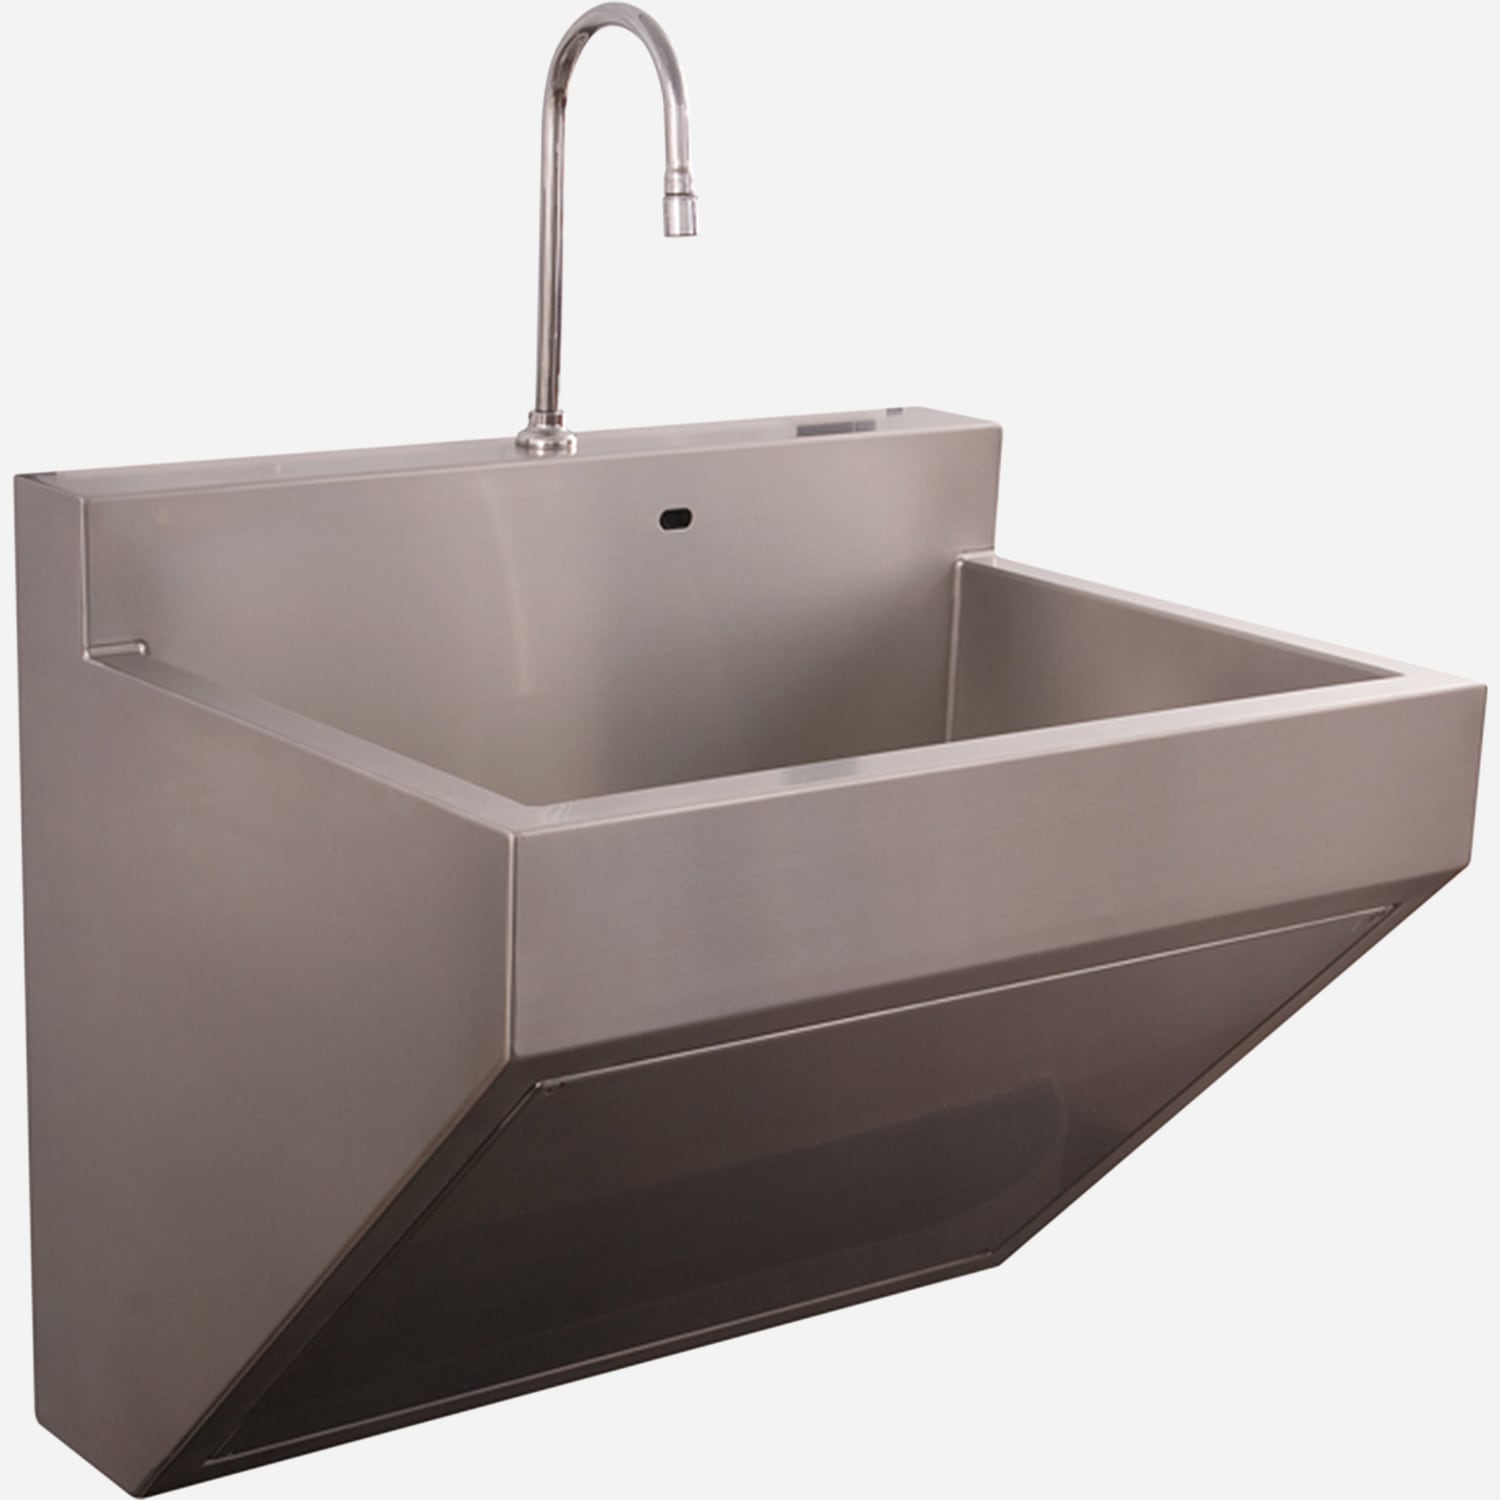 4113 Compact Scrub Sink - Three Hand Wash Stations, Stainless